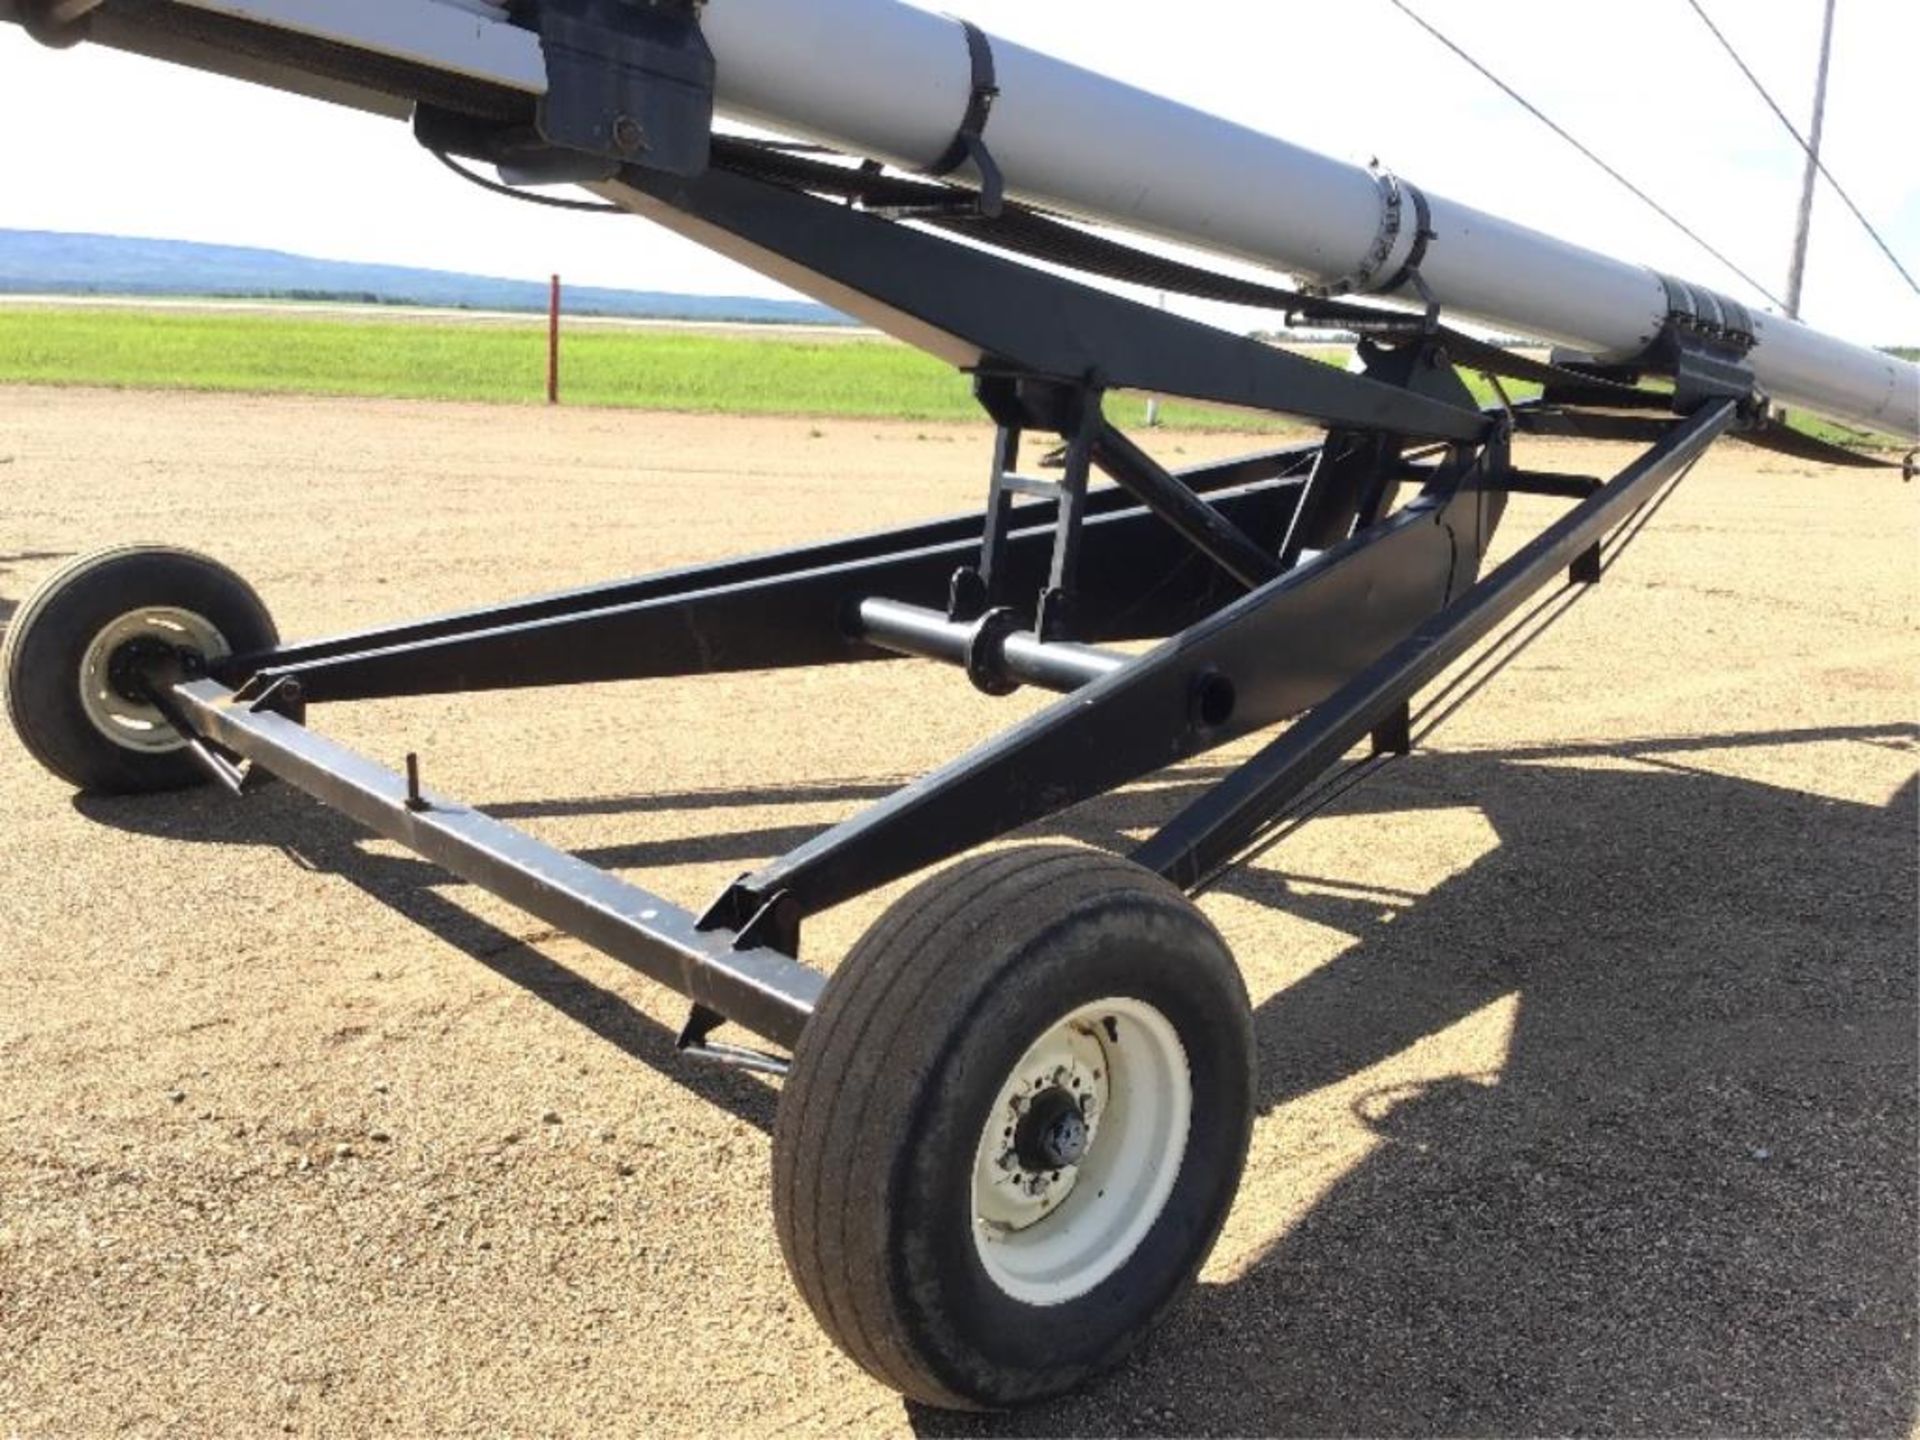 Convey All 14 X 65Ft PTO Drive Grain Conveyor s/n 7897874 540PTO, c/w Brand New Belt valued at $3, - Image 10 of 11